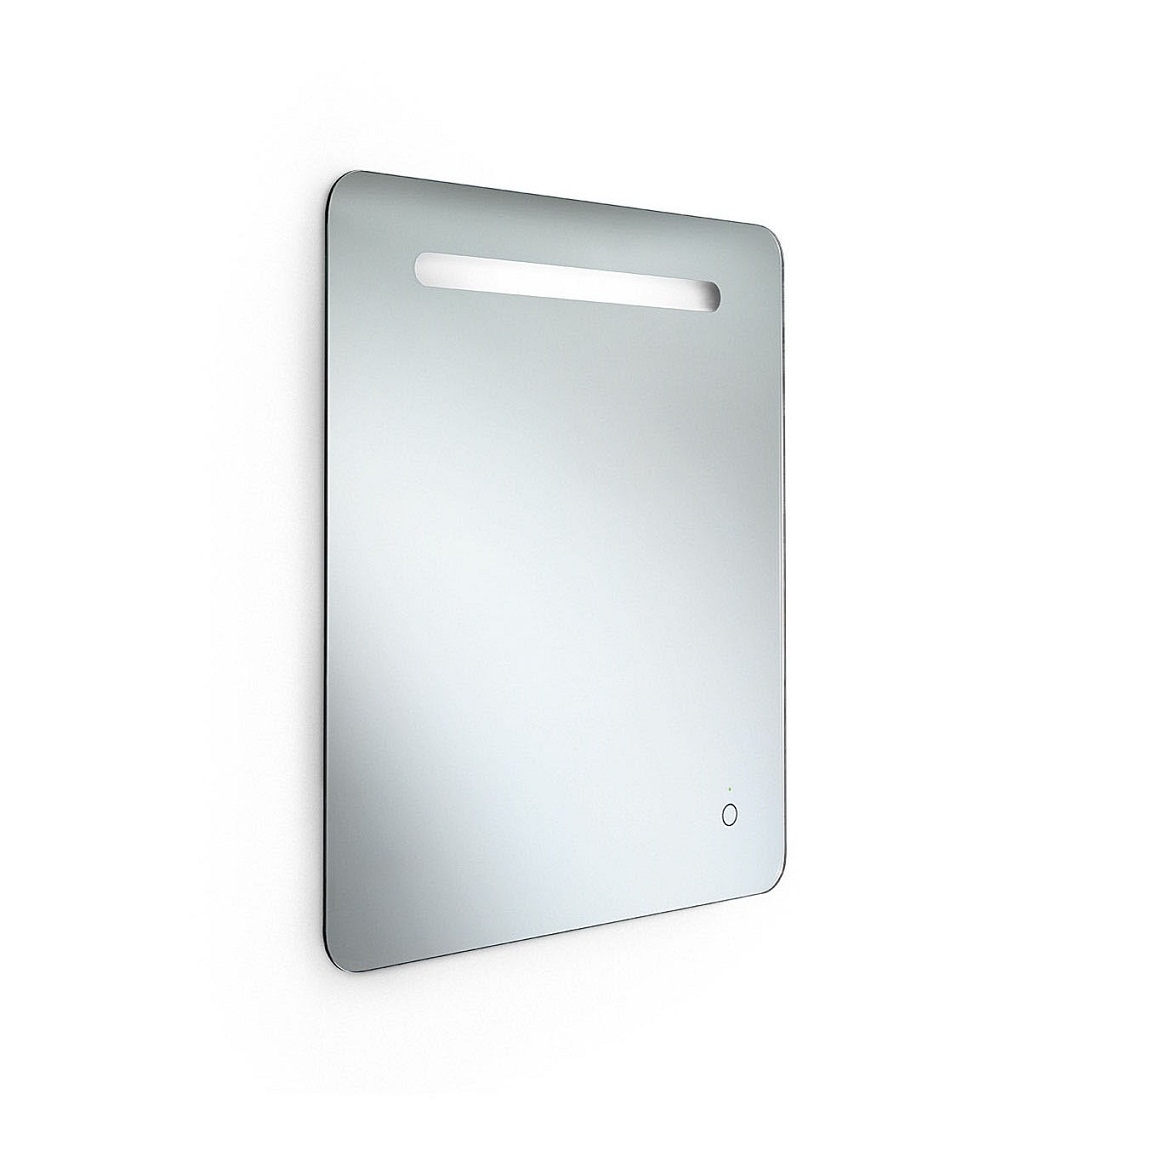 Speci 56703 mirror with built in LED light